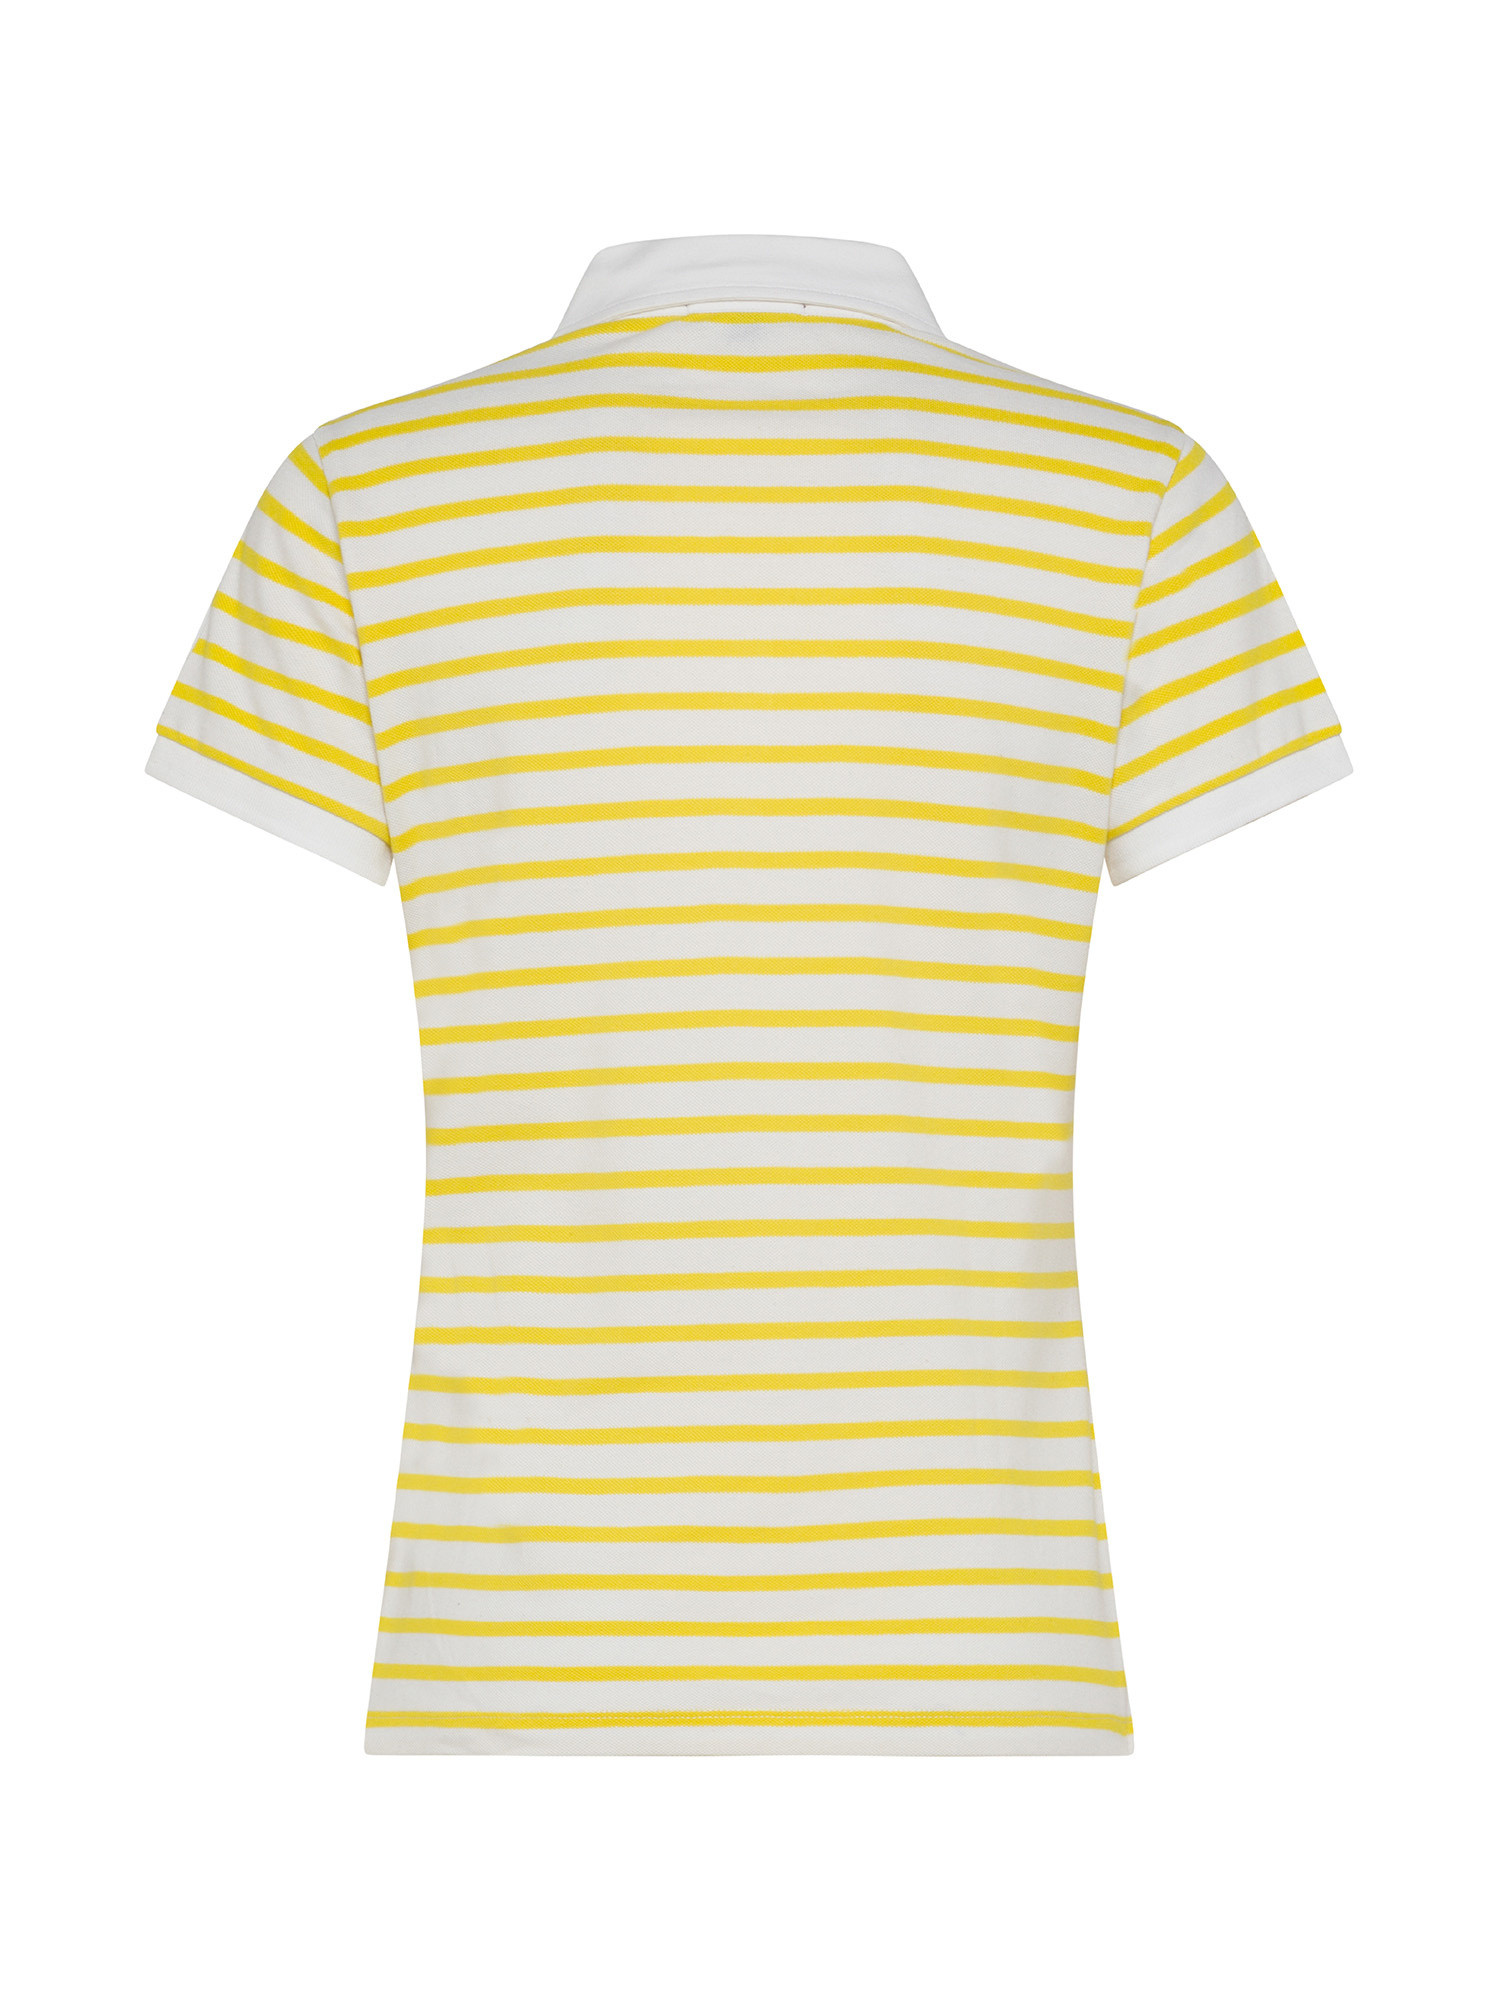 Koan - Striped T-shirt with ruffles, Yellow, large image number 1